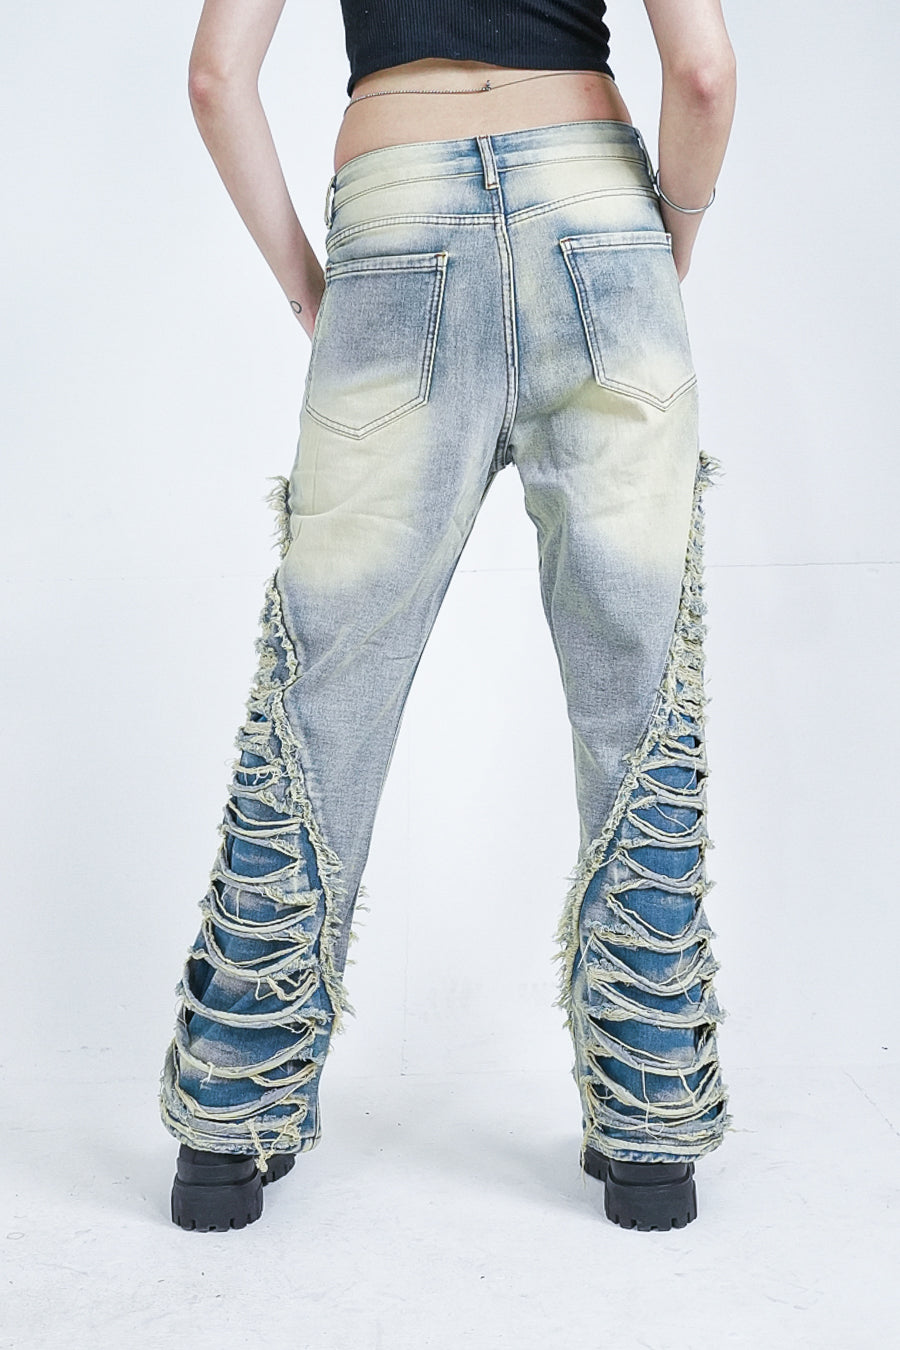 RIOT RIPPER WASHED VALKYRE JEANS